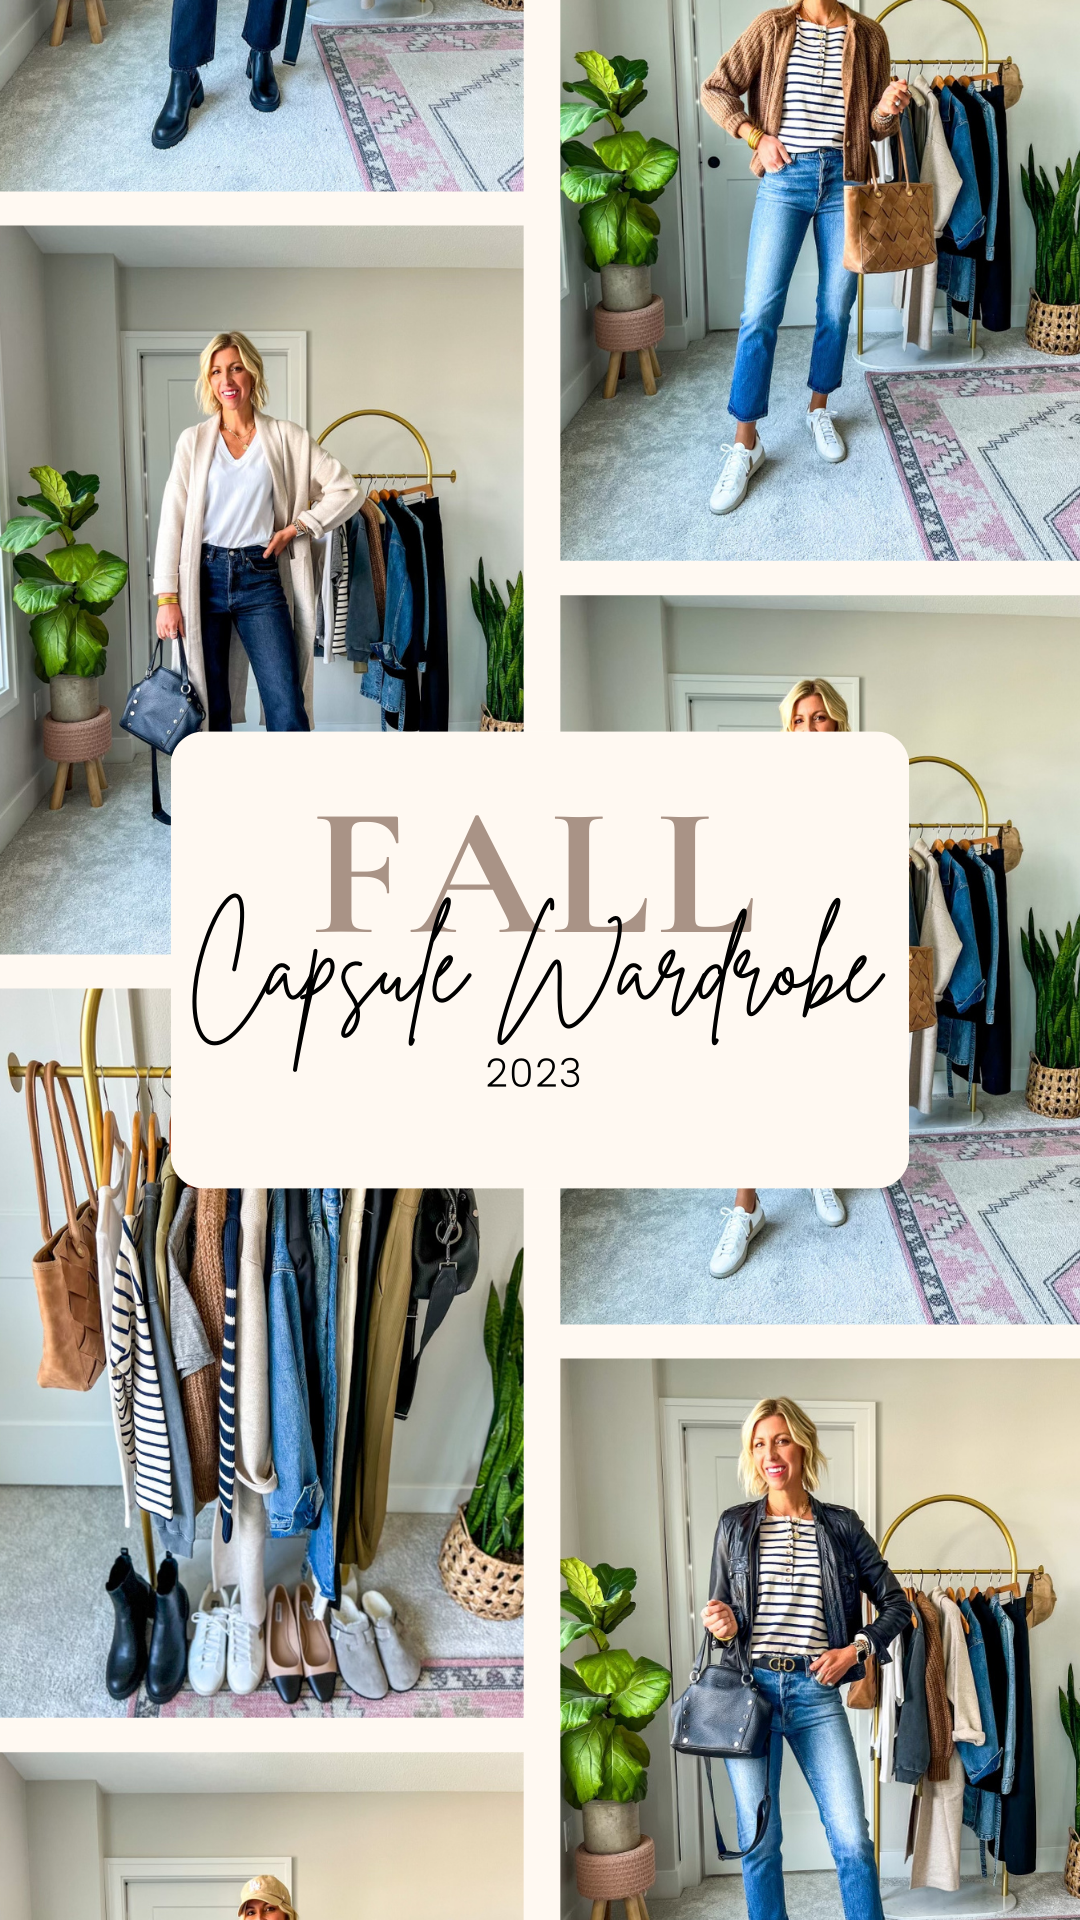 Private Capsule Wardrobe Creation & Styling